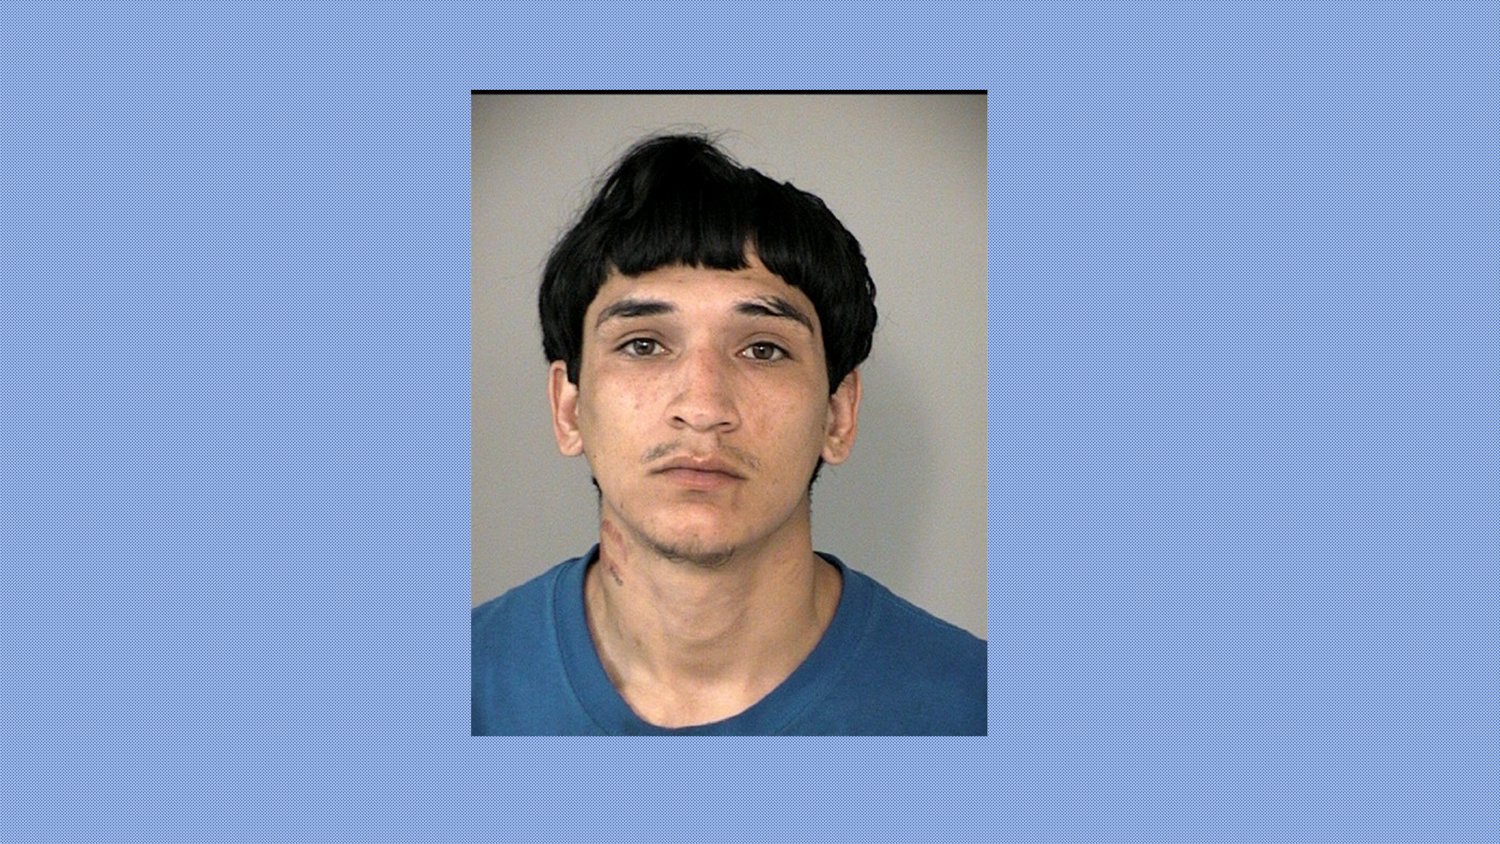 Julian Olvera, 21, of Rosenberg has been arrested and charged with burglary of a habitation and cruelty to animals.